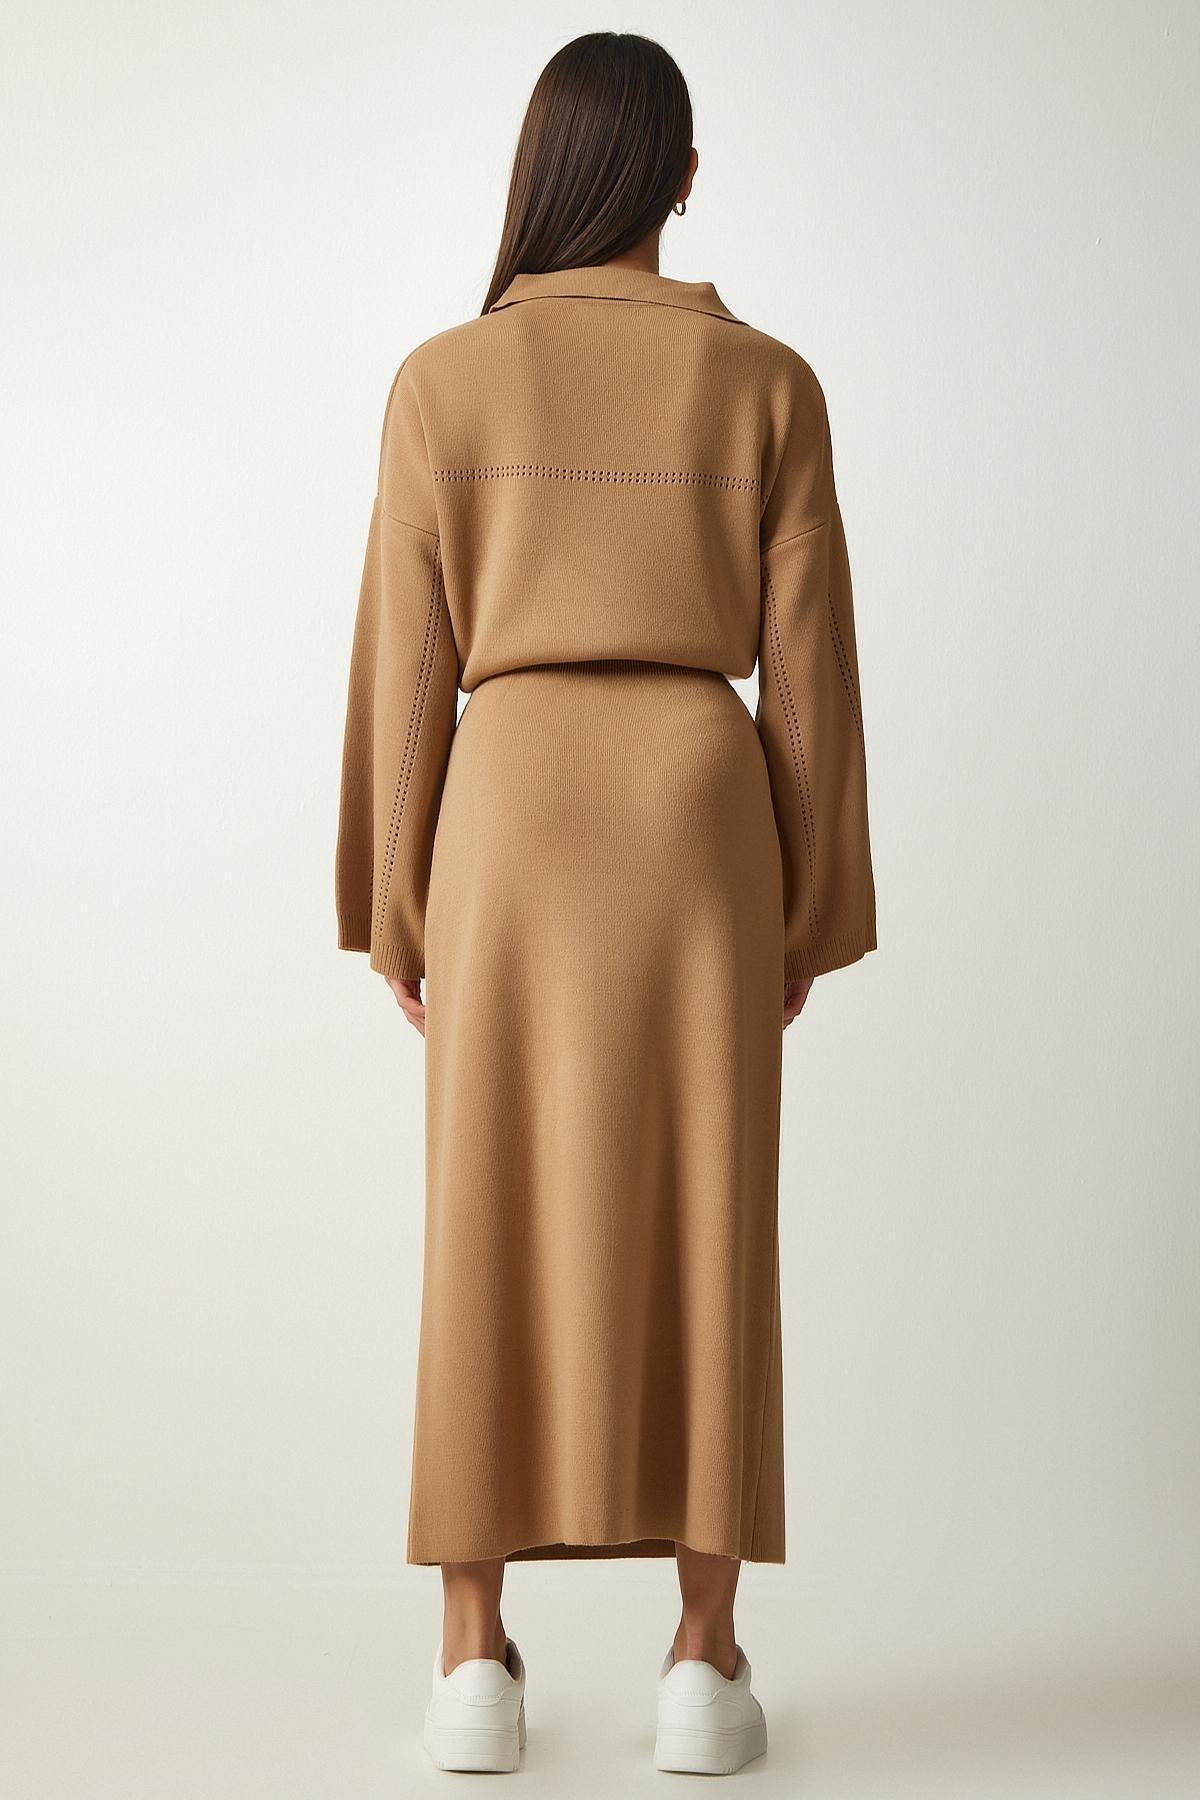 Happiness Istanbul - Beige Polo Neck Relaxed Co-Ord Set